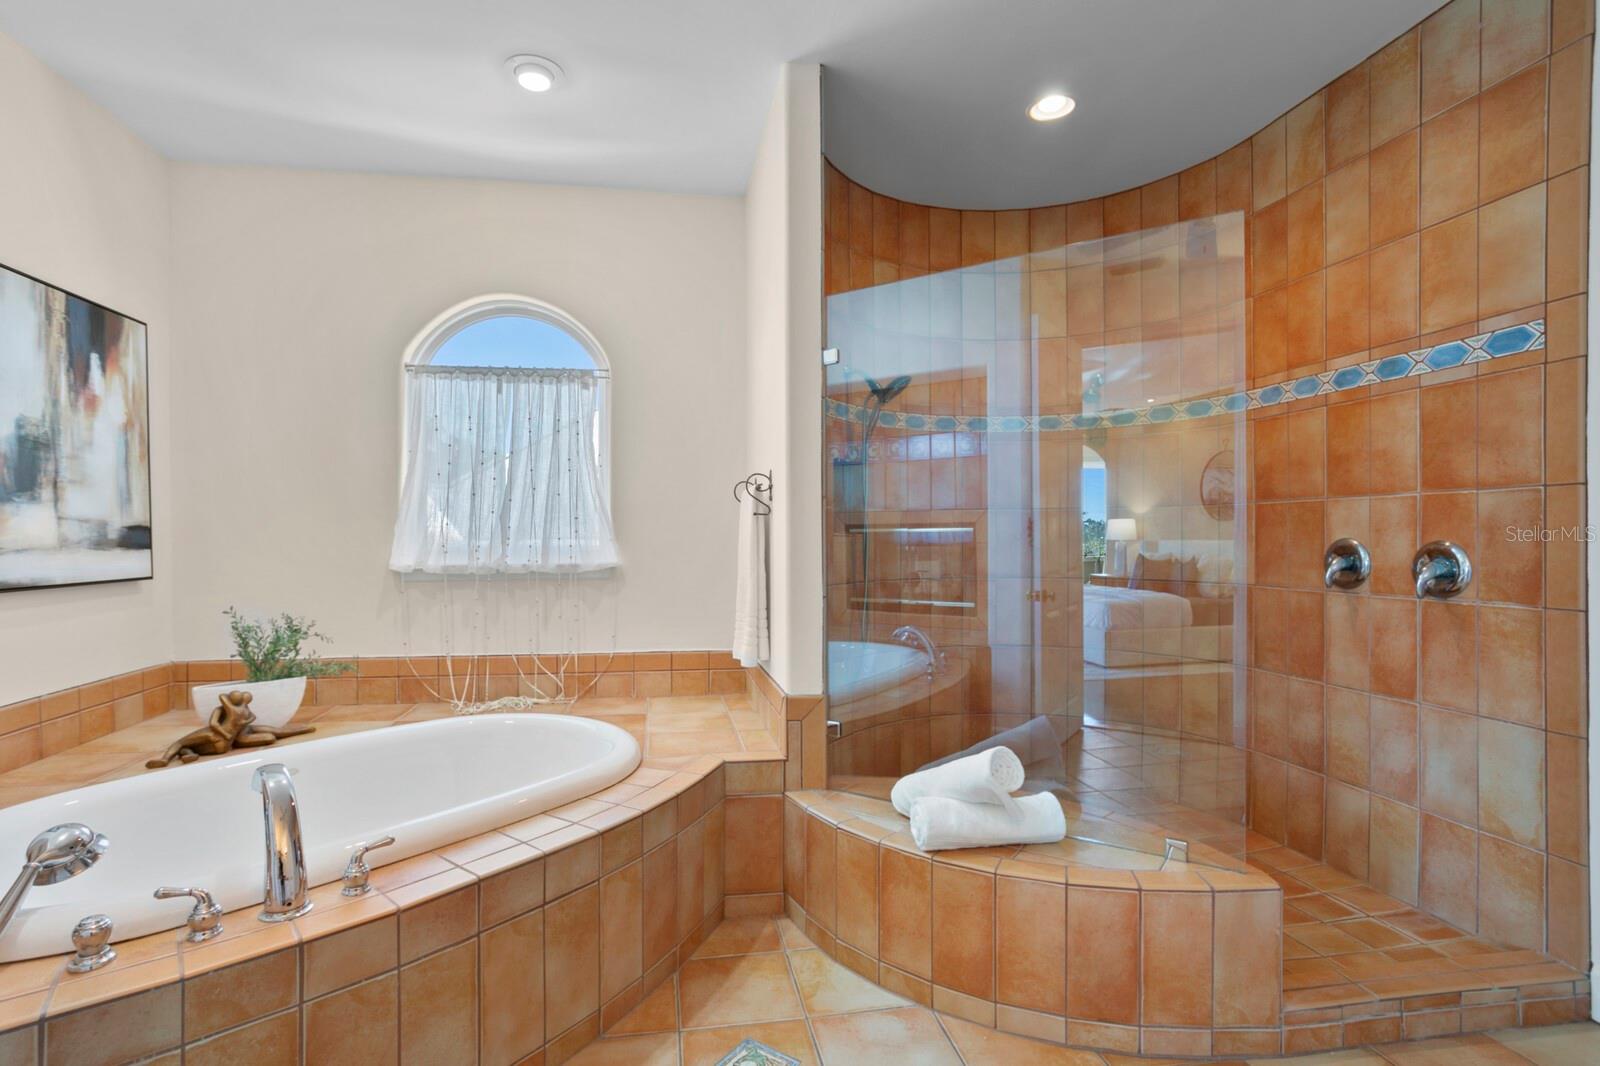 Double head shower and separate soaking tub